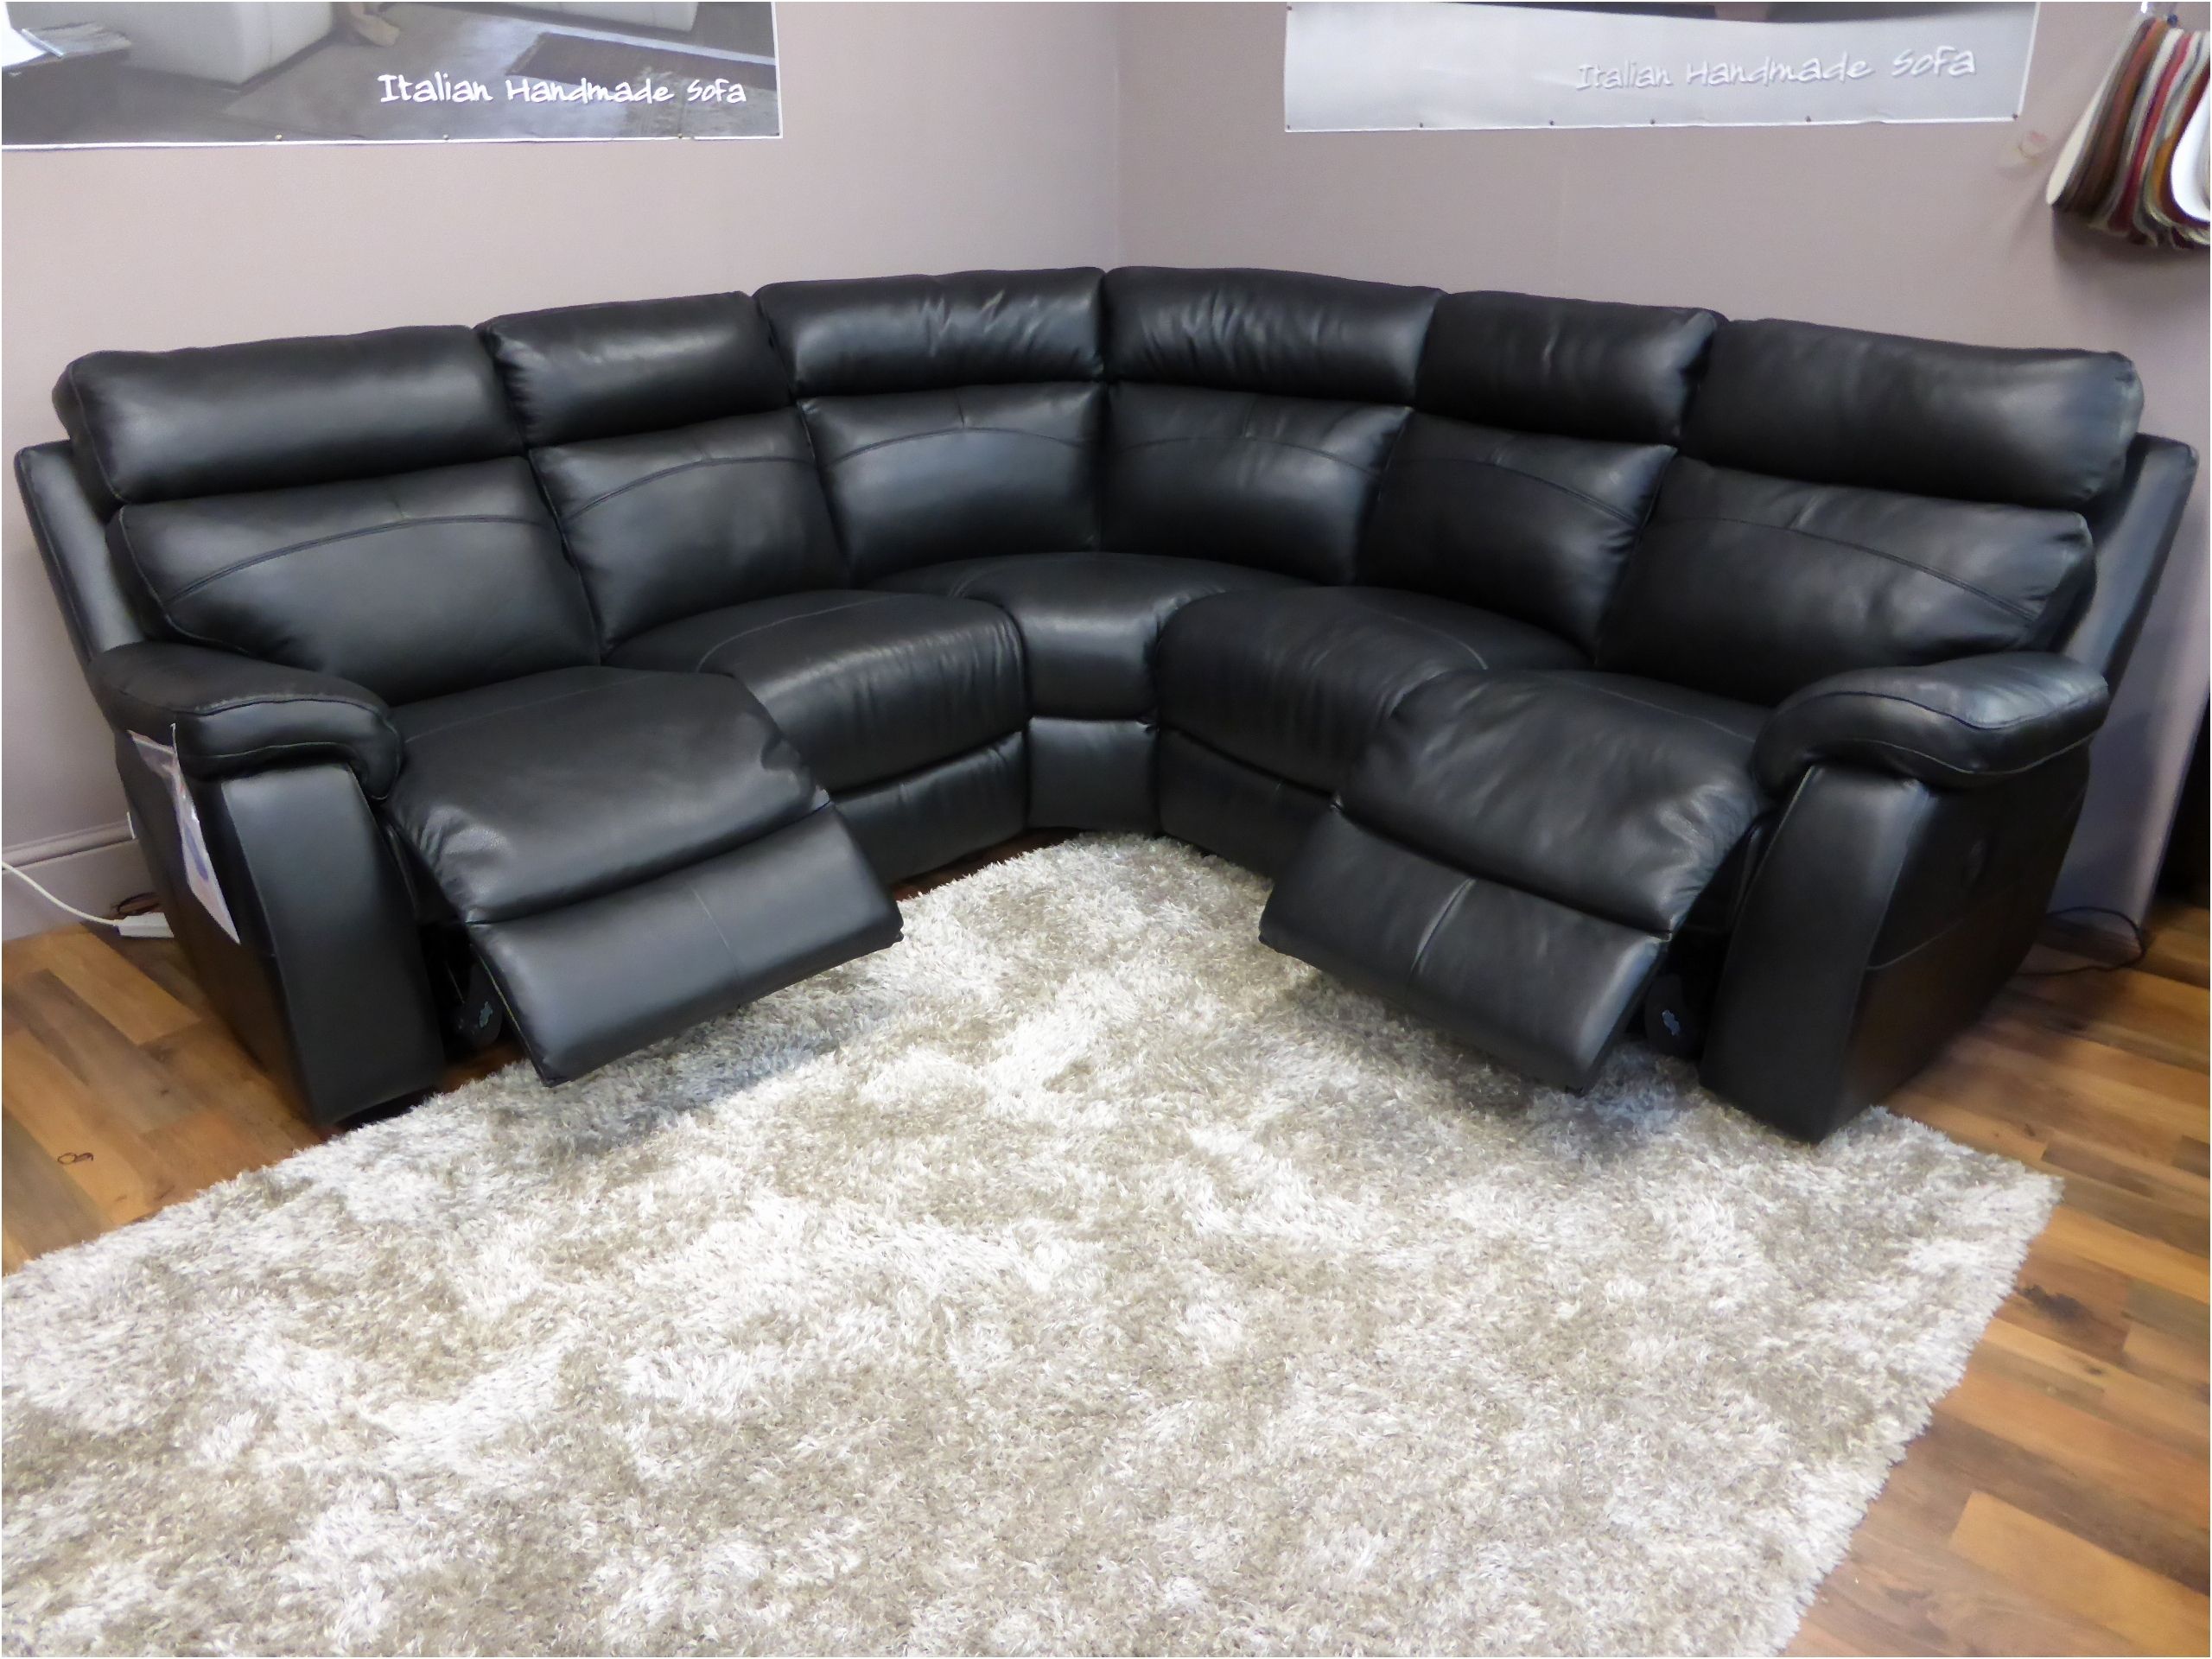 Beautiful Lazy Boy Sectional Sofas Inspirational – Uboxy Throughout Sectional Sofas At Lazy Boy (View 7 of 10)